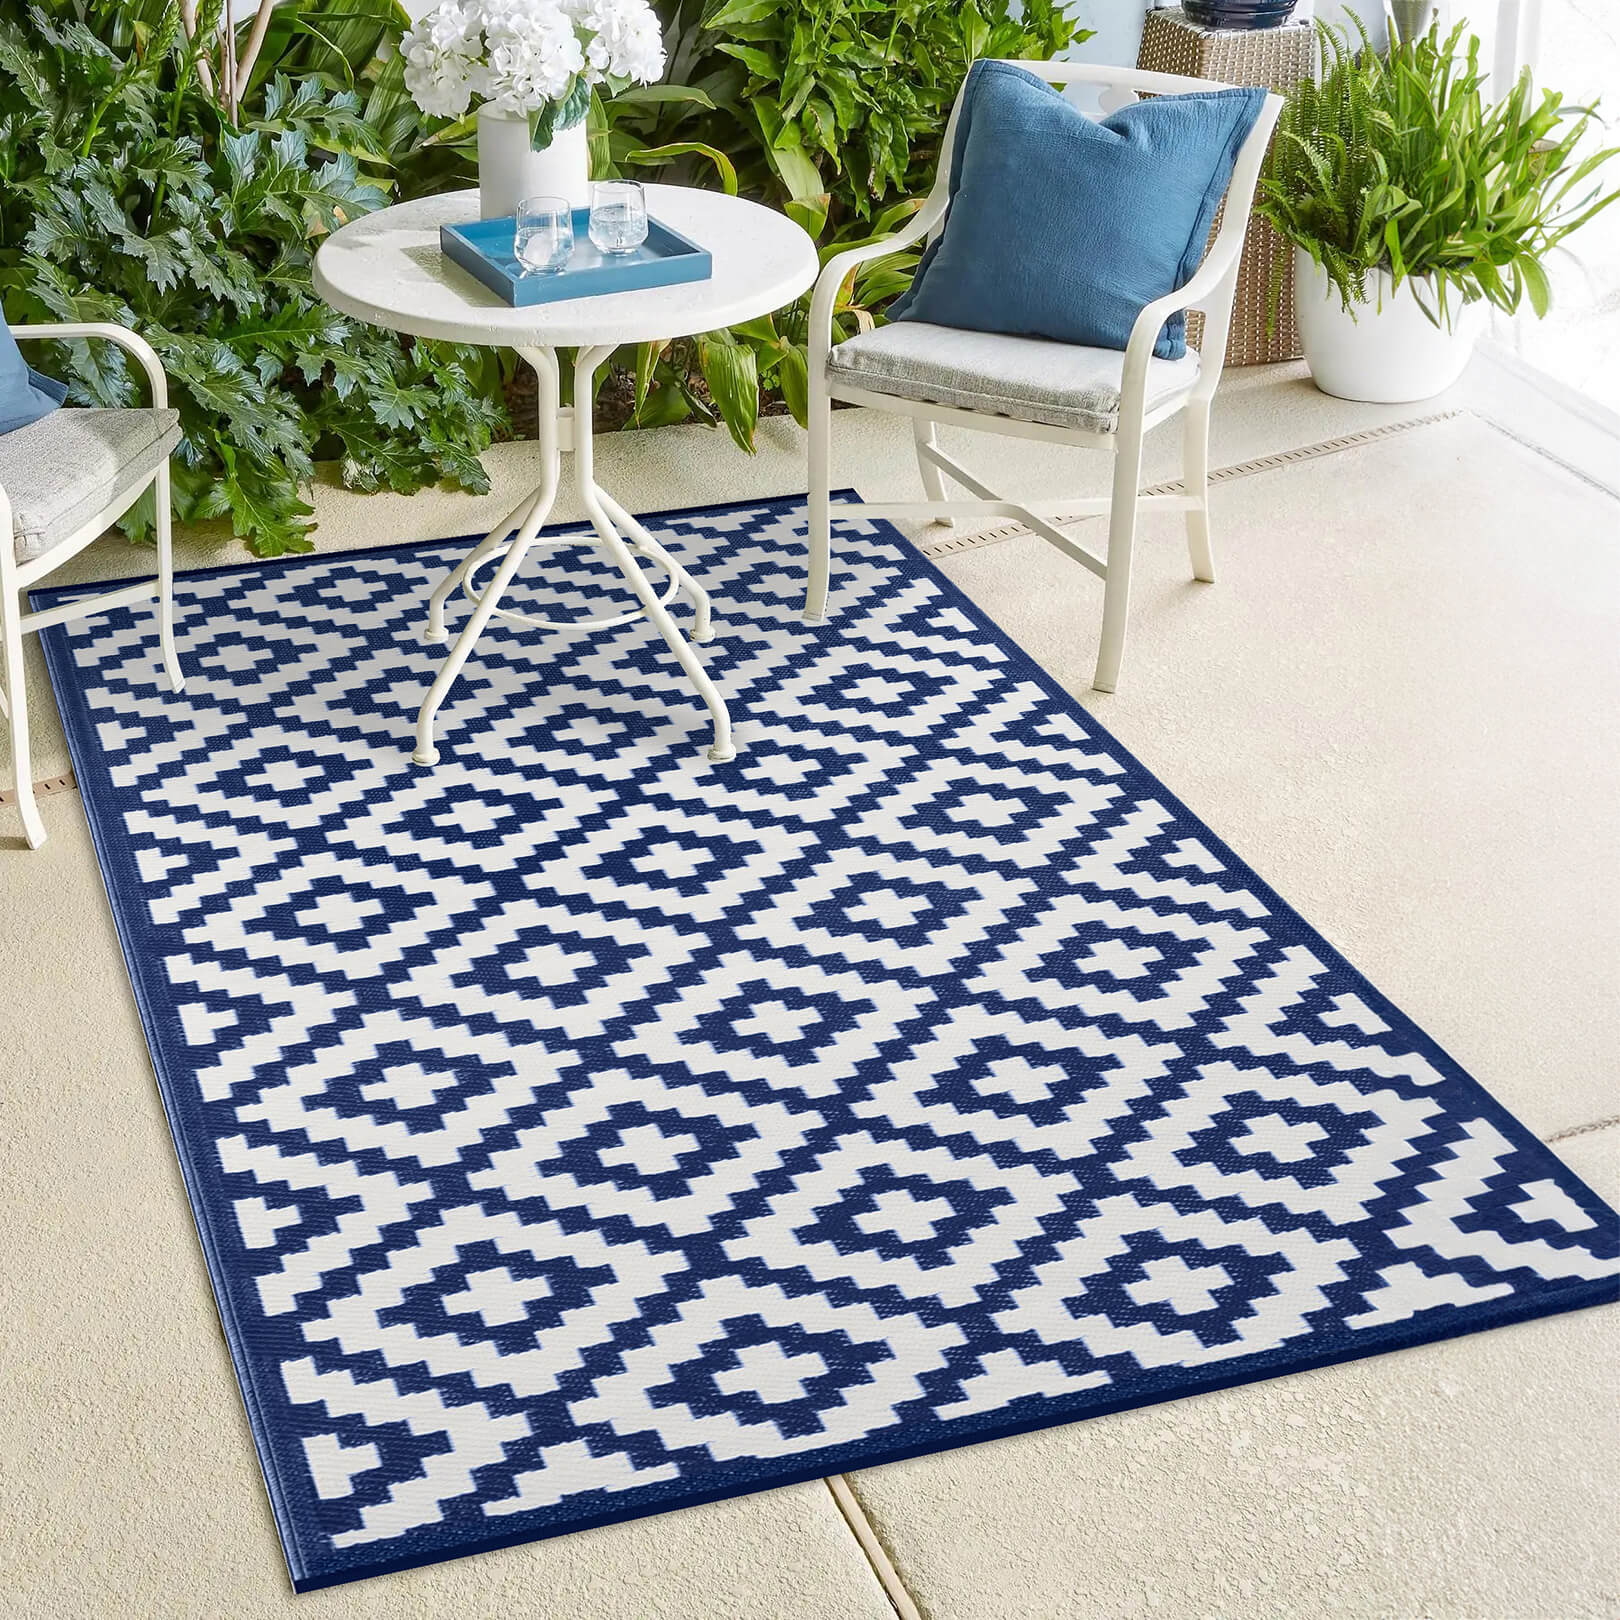 Nirvana Outdoor Recycled Plastic Rug (Navy Blue/White)